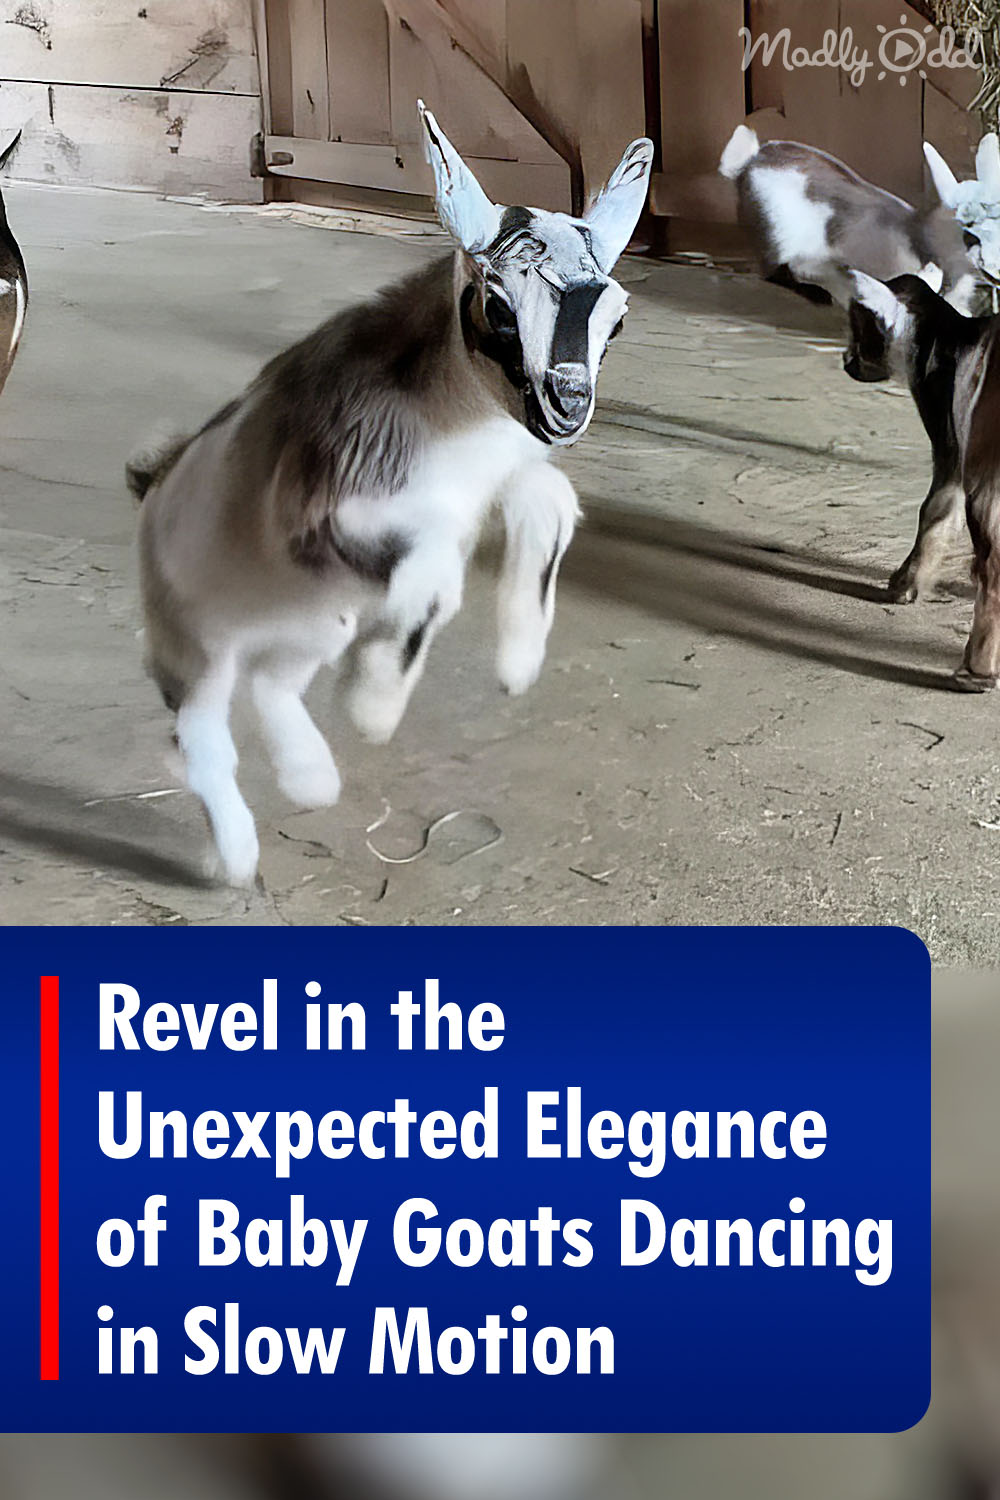 Revel in the Unexpected Elegance of Baby Goats Dancing in Slow Motion